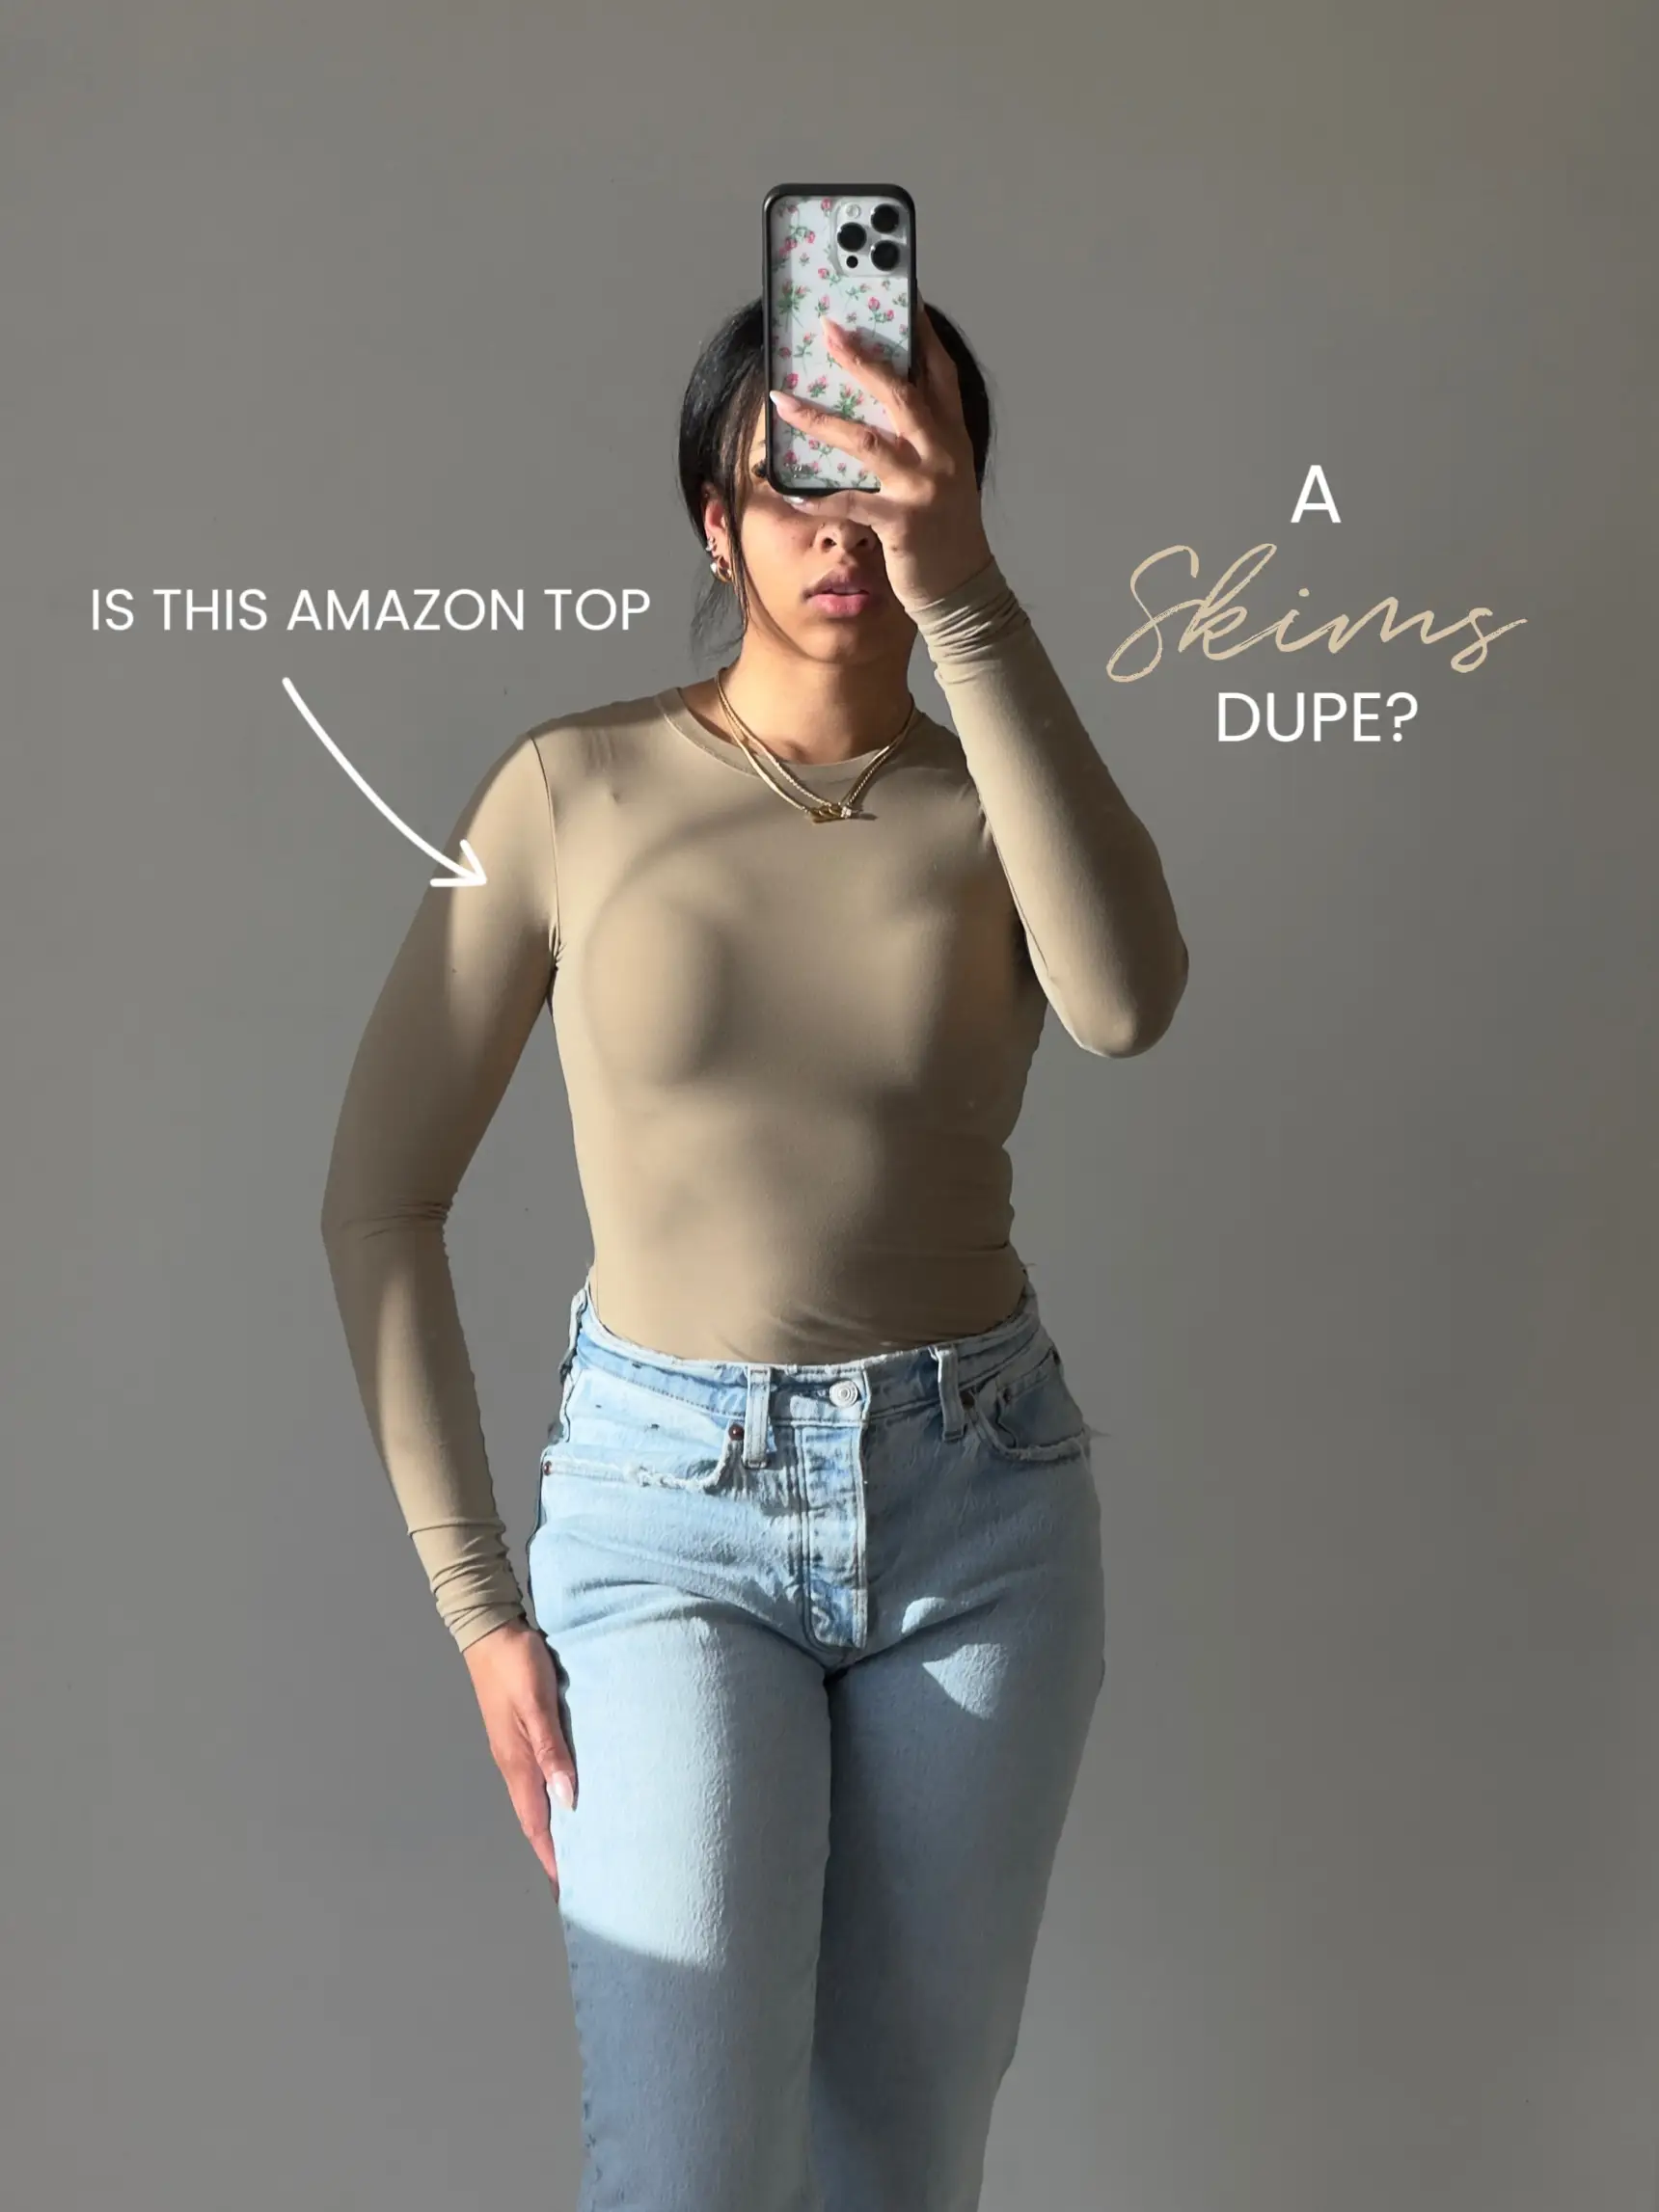 10 Skims Bodysuit Dupes That Look & Feel Identical To The Real